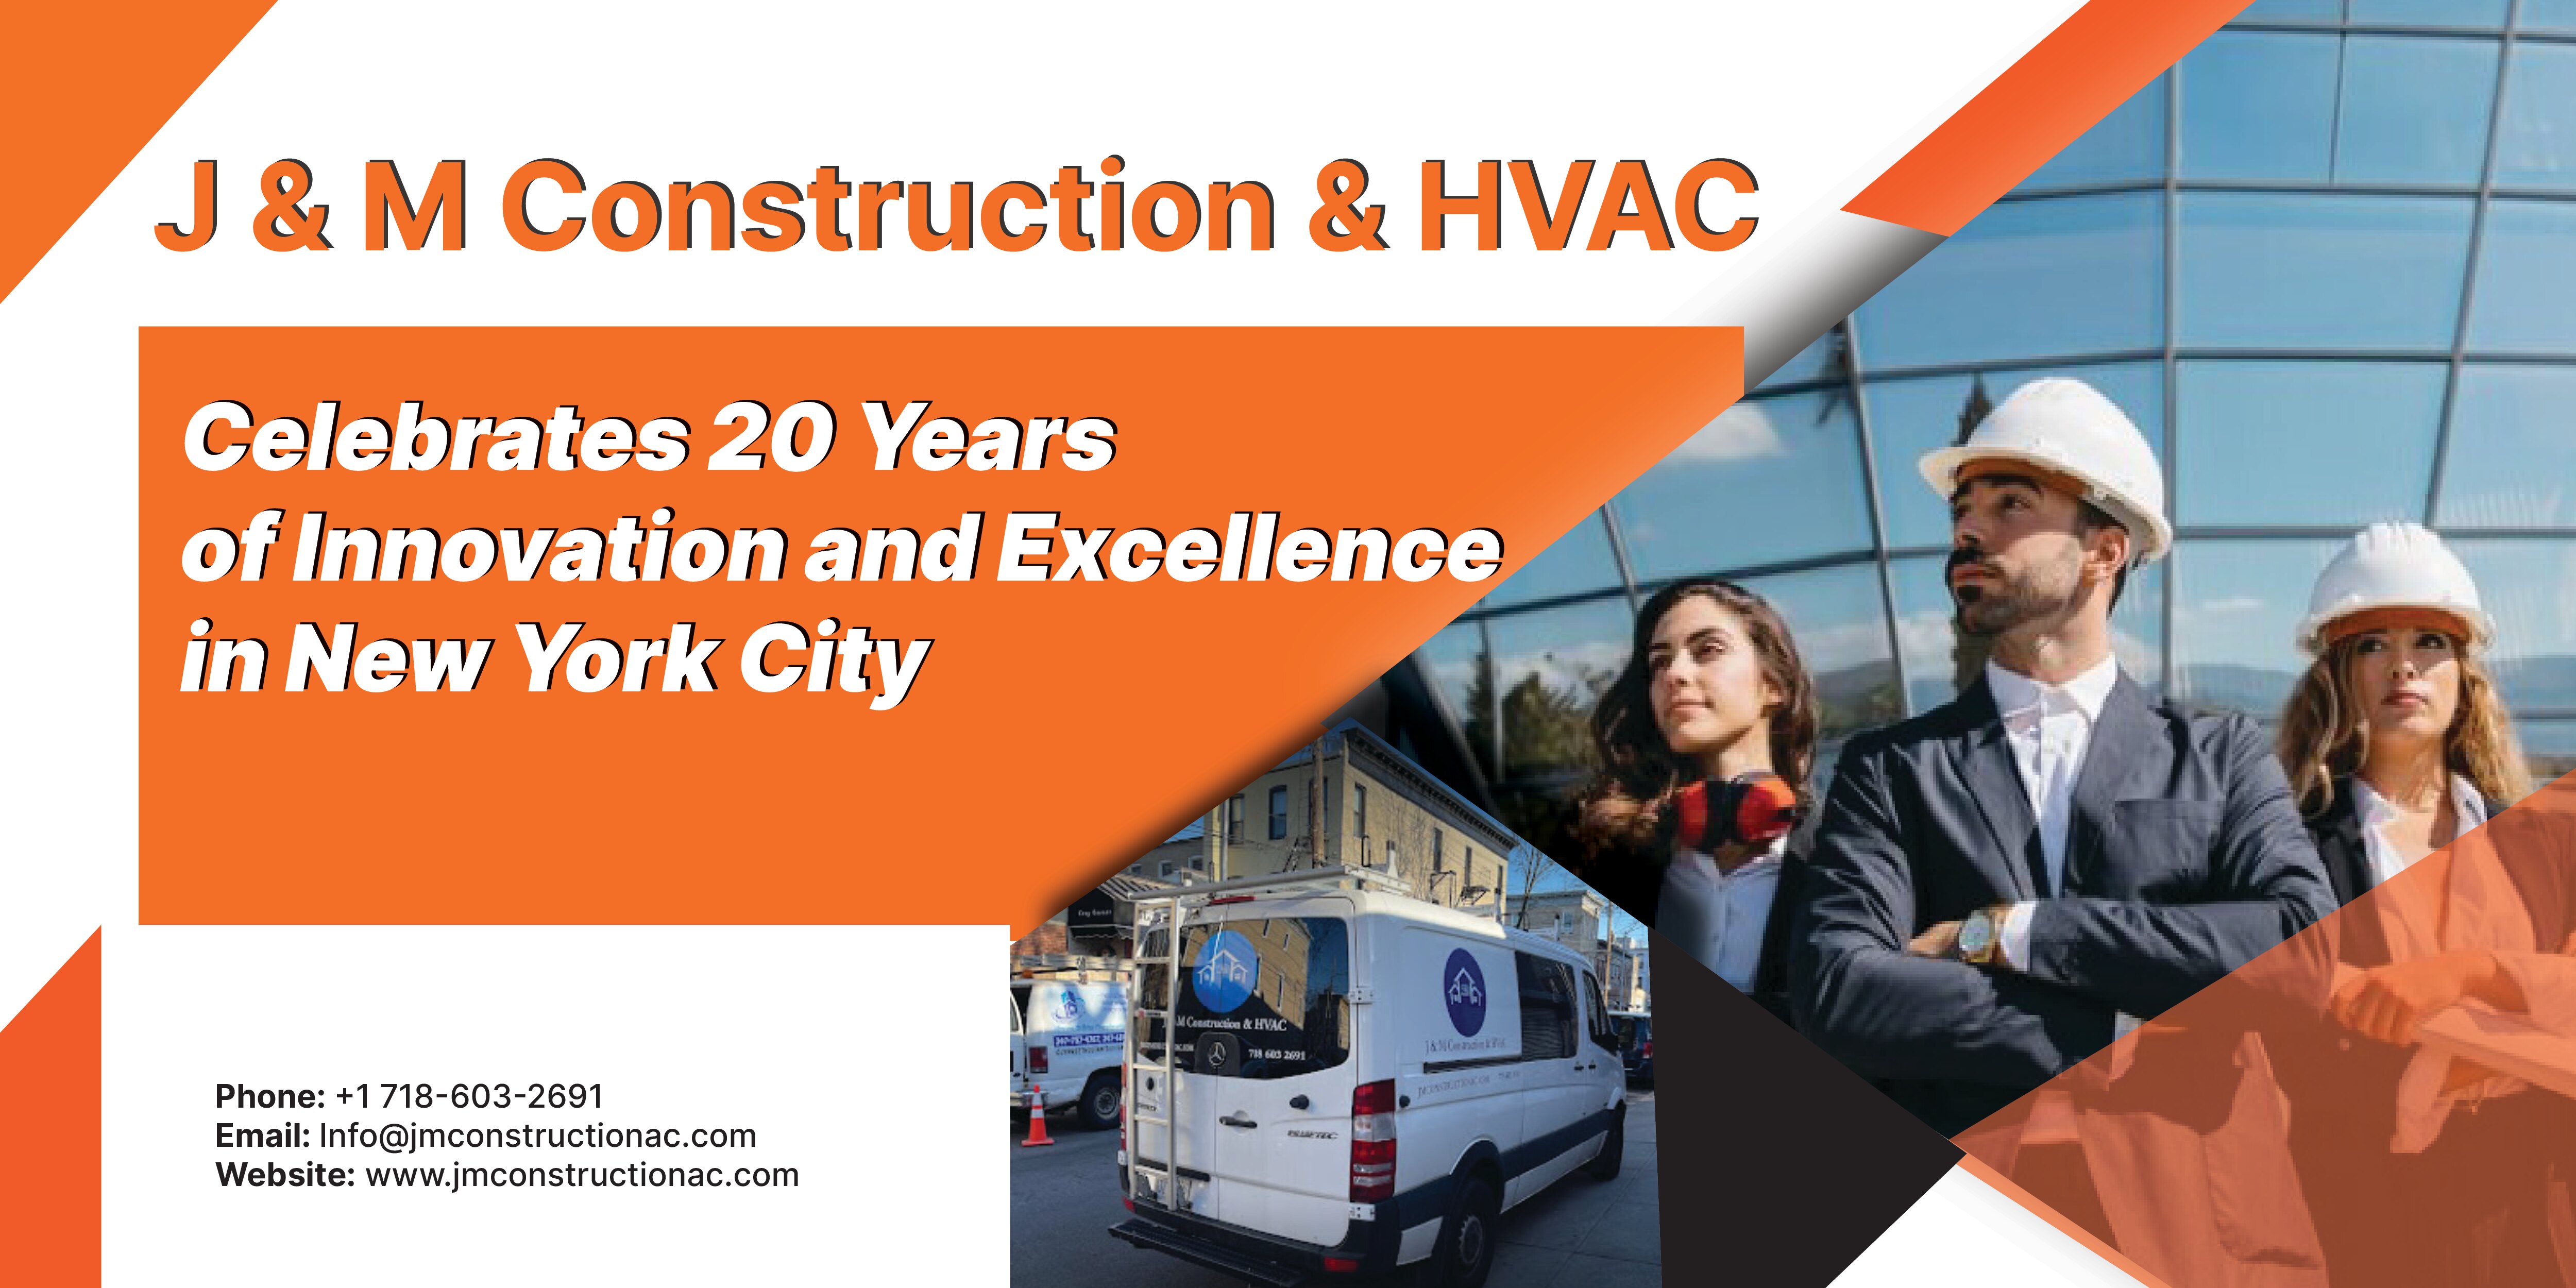 J & M Construction & HVAC Celebrates 20 Years of Innovation and Excellence in New York City